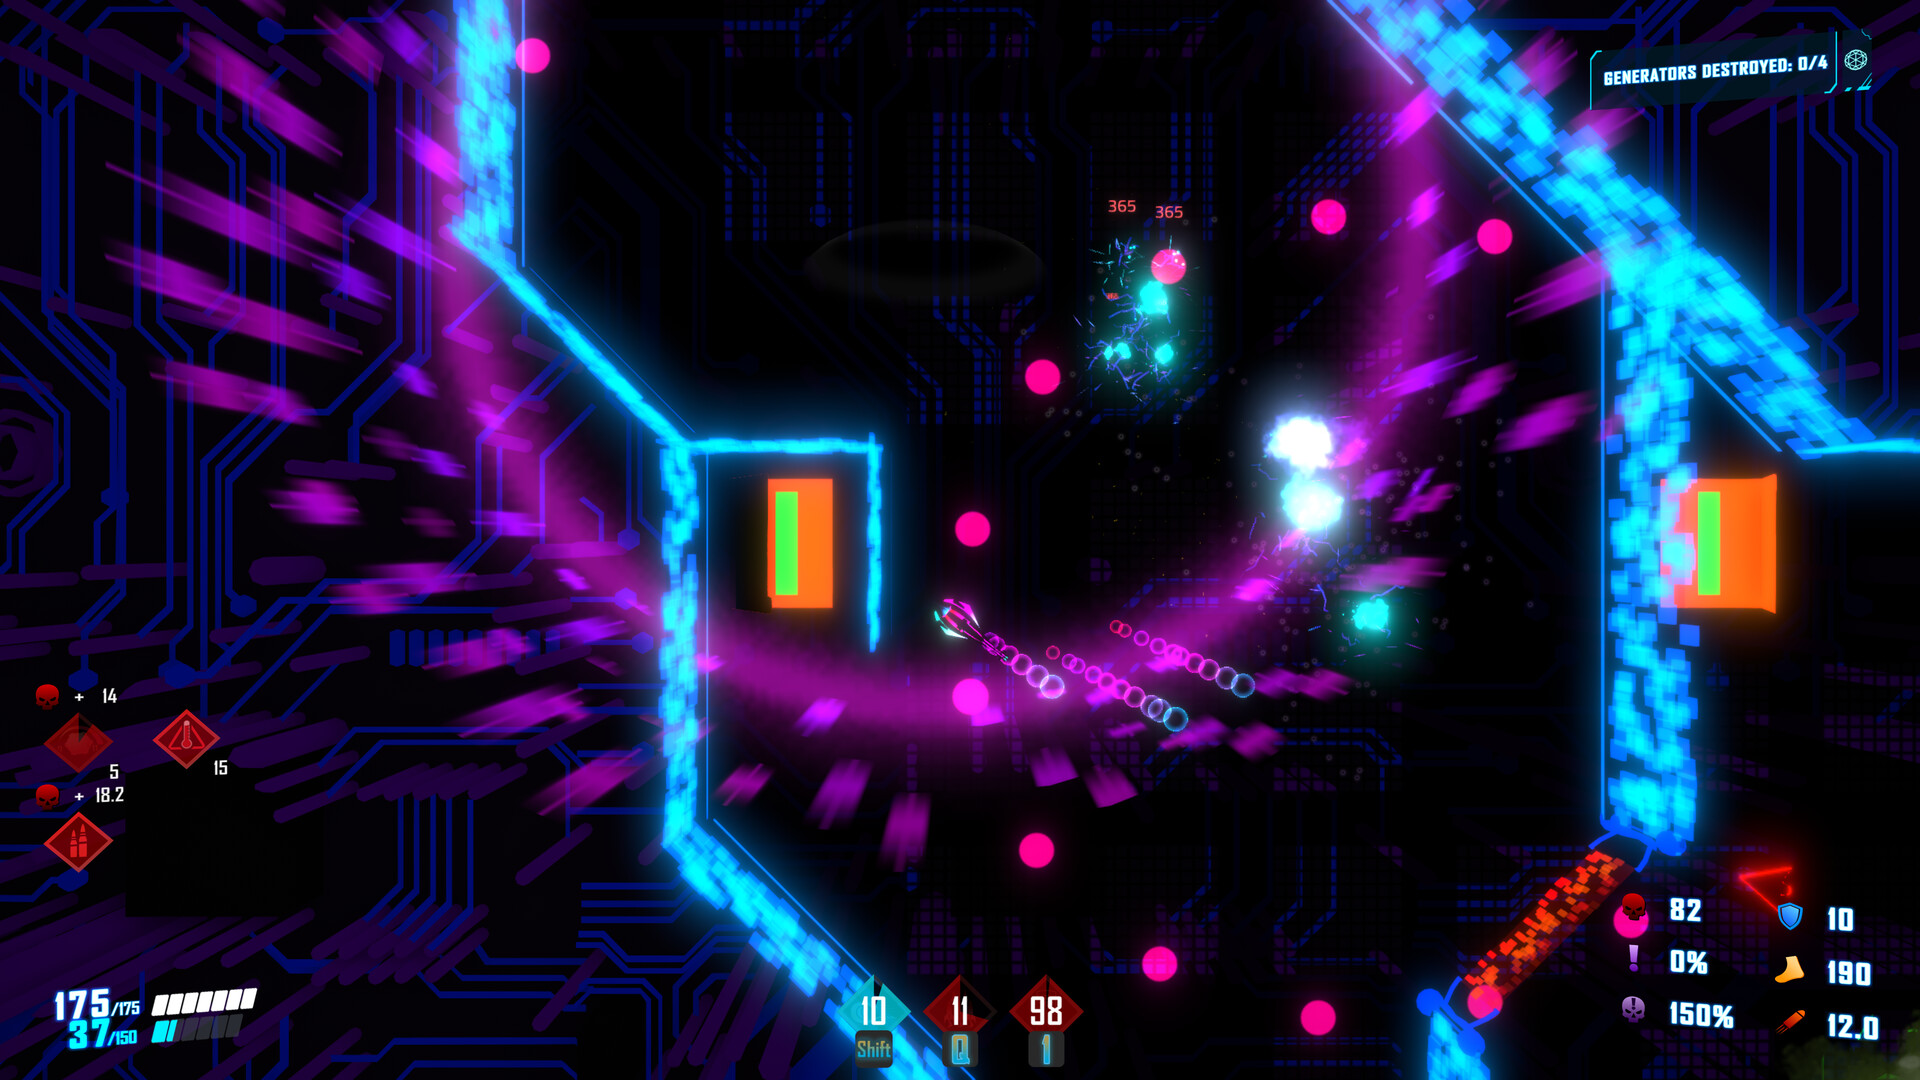 Beat the Machine: Rebooted - Soundtrack Featured Screenshot #1